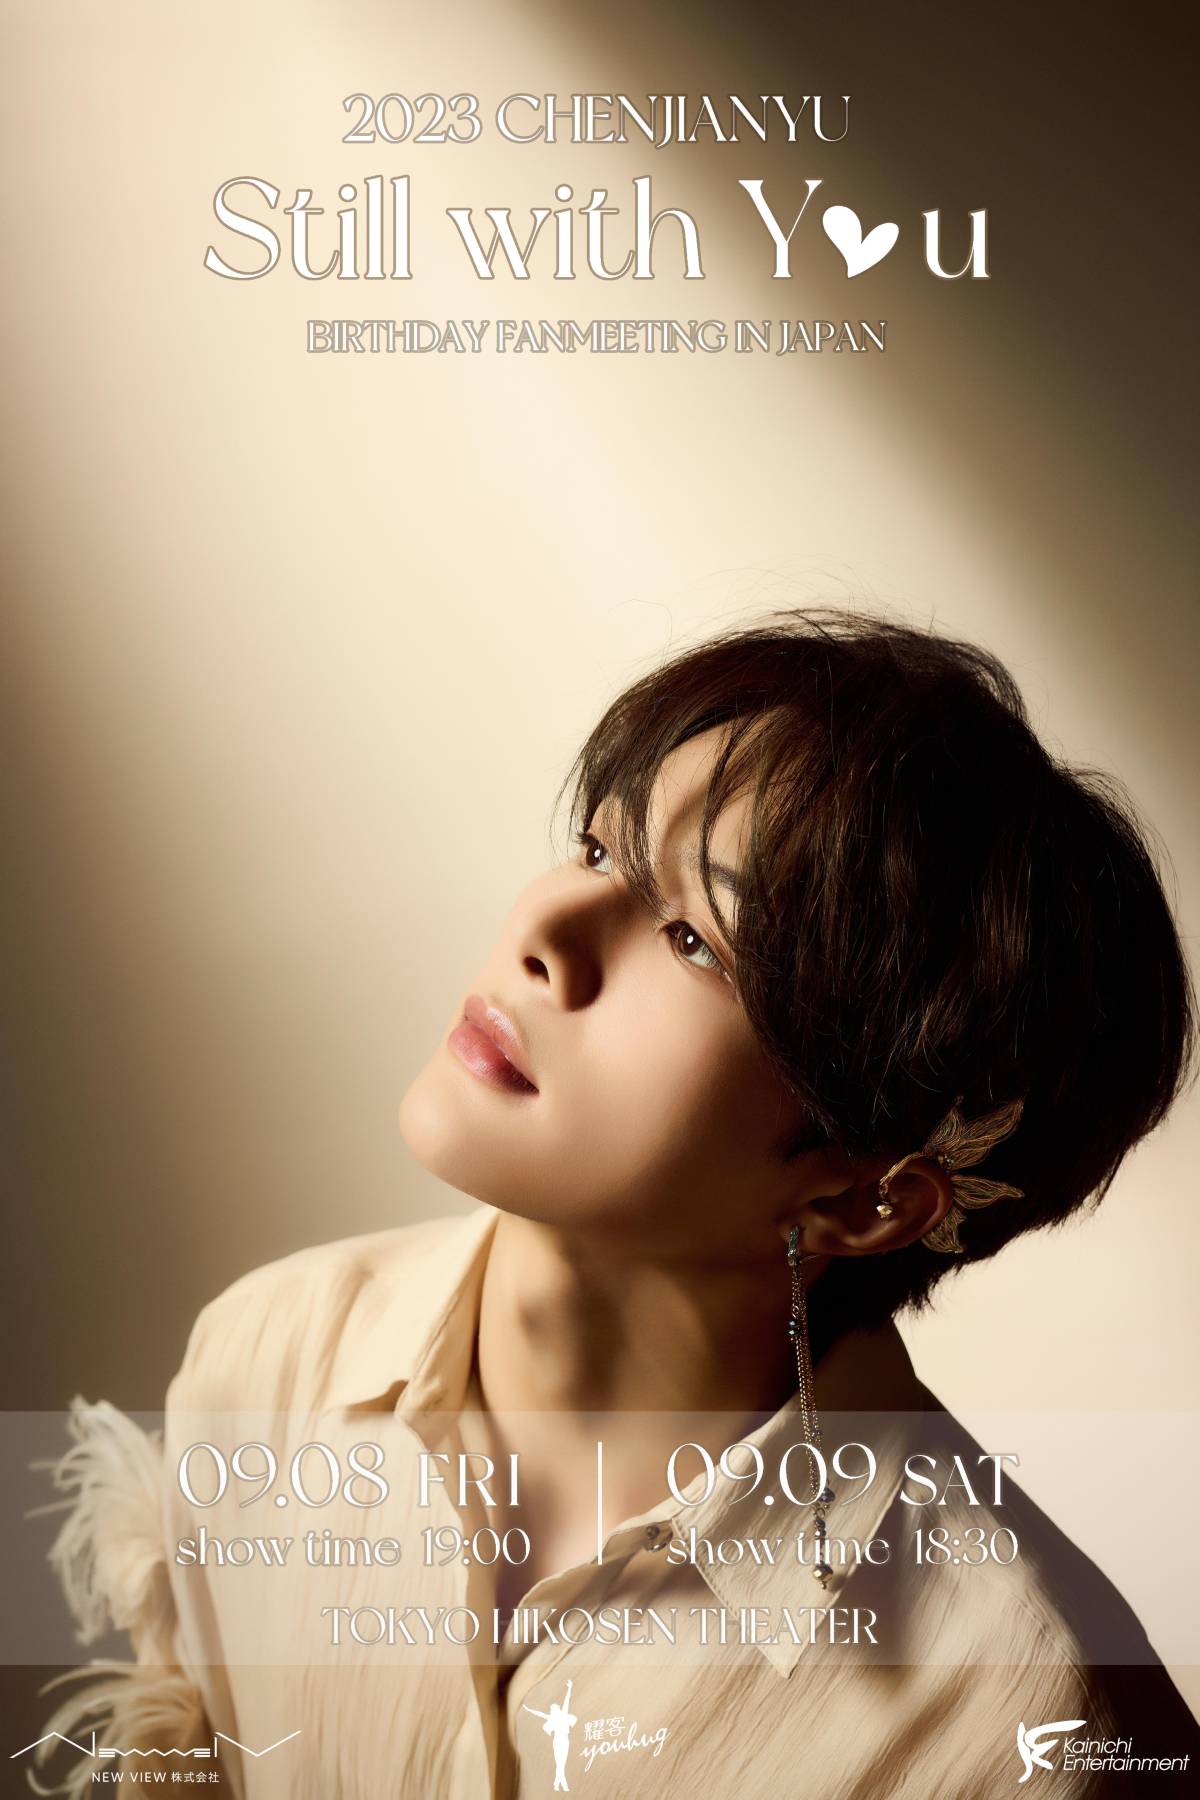 『-Still with You-2023 CHENJIANYU BIRTHDAY FANMEETING IN JAPAN』